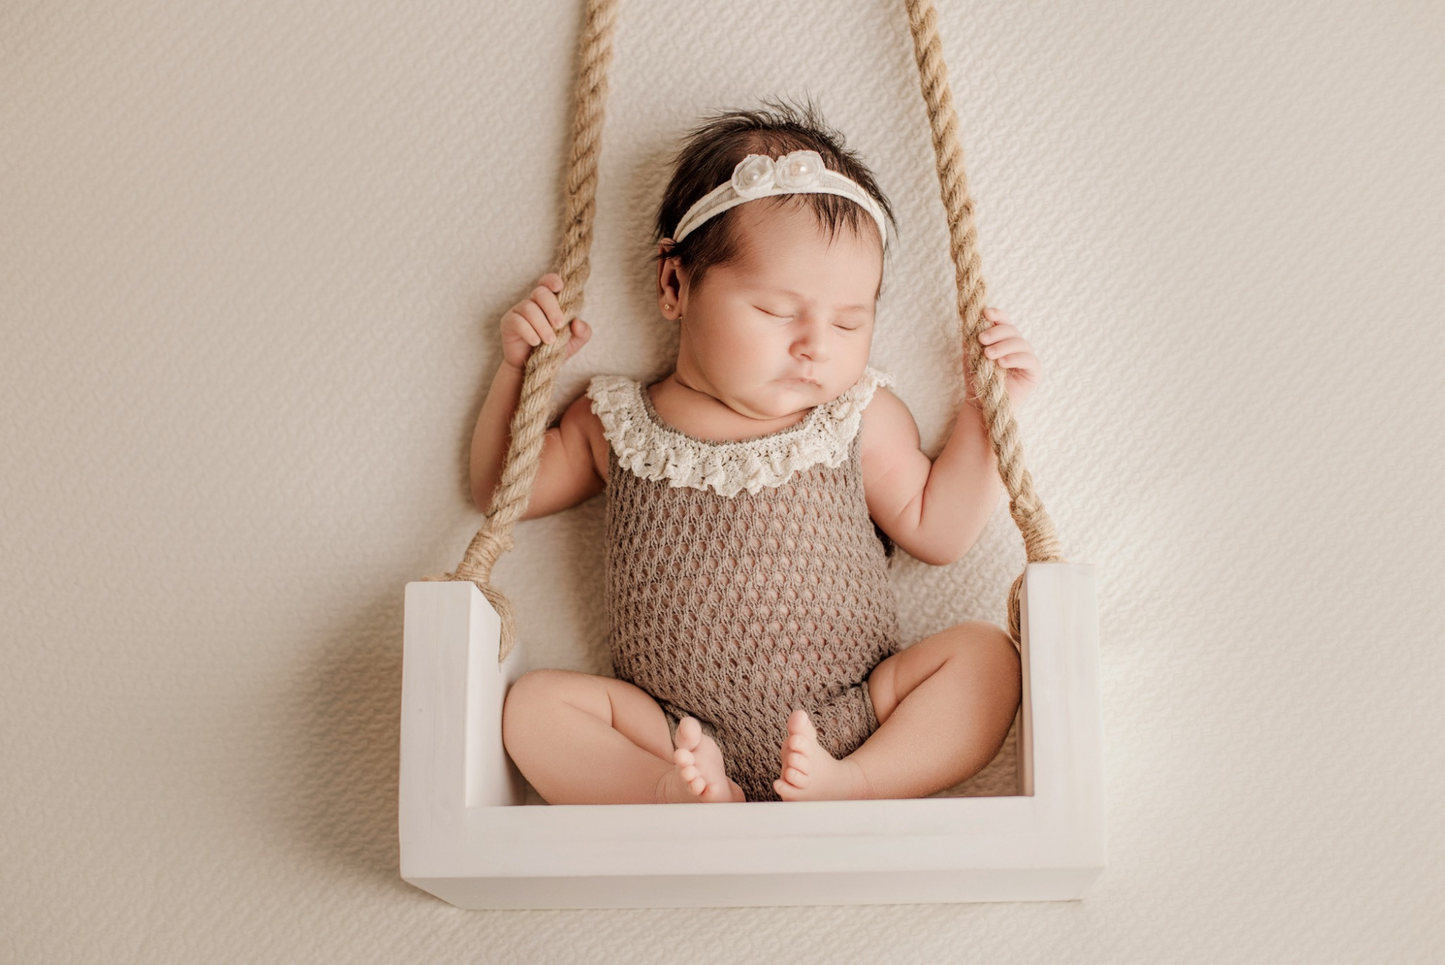 Newborn asleep on a white rustic swing, wearing a knit prop outfit. 